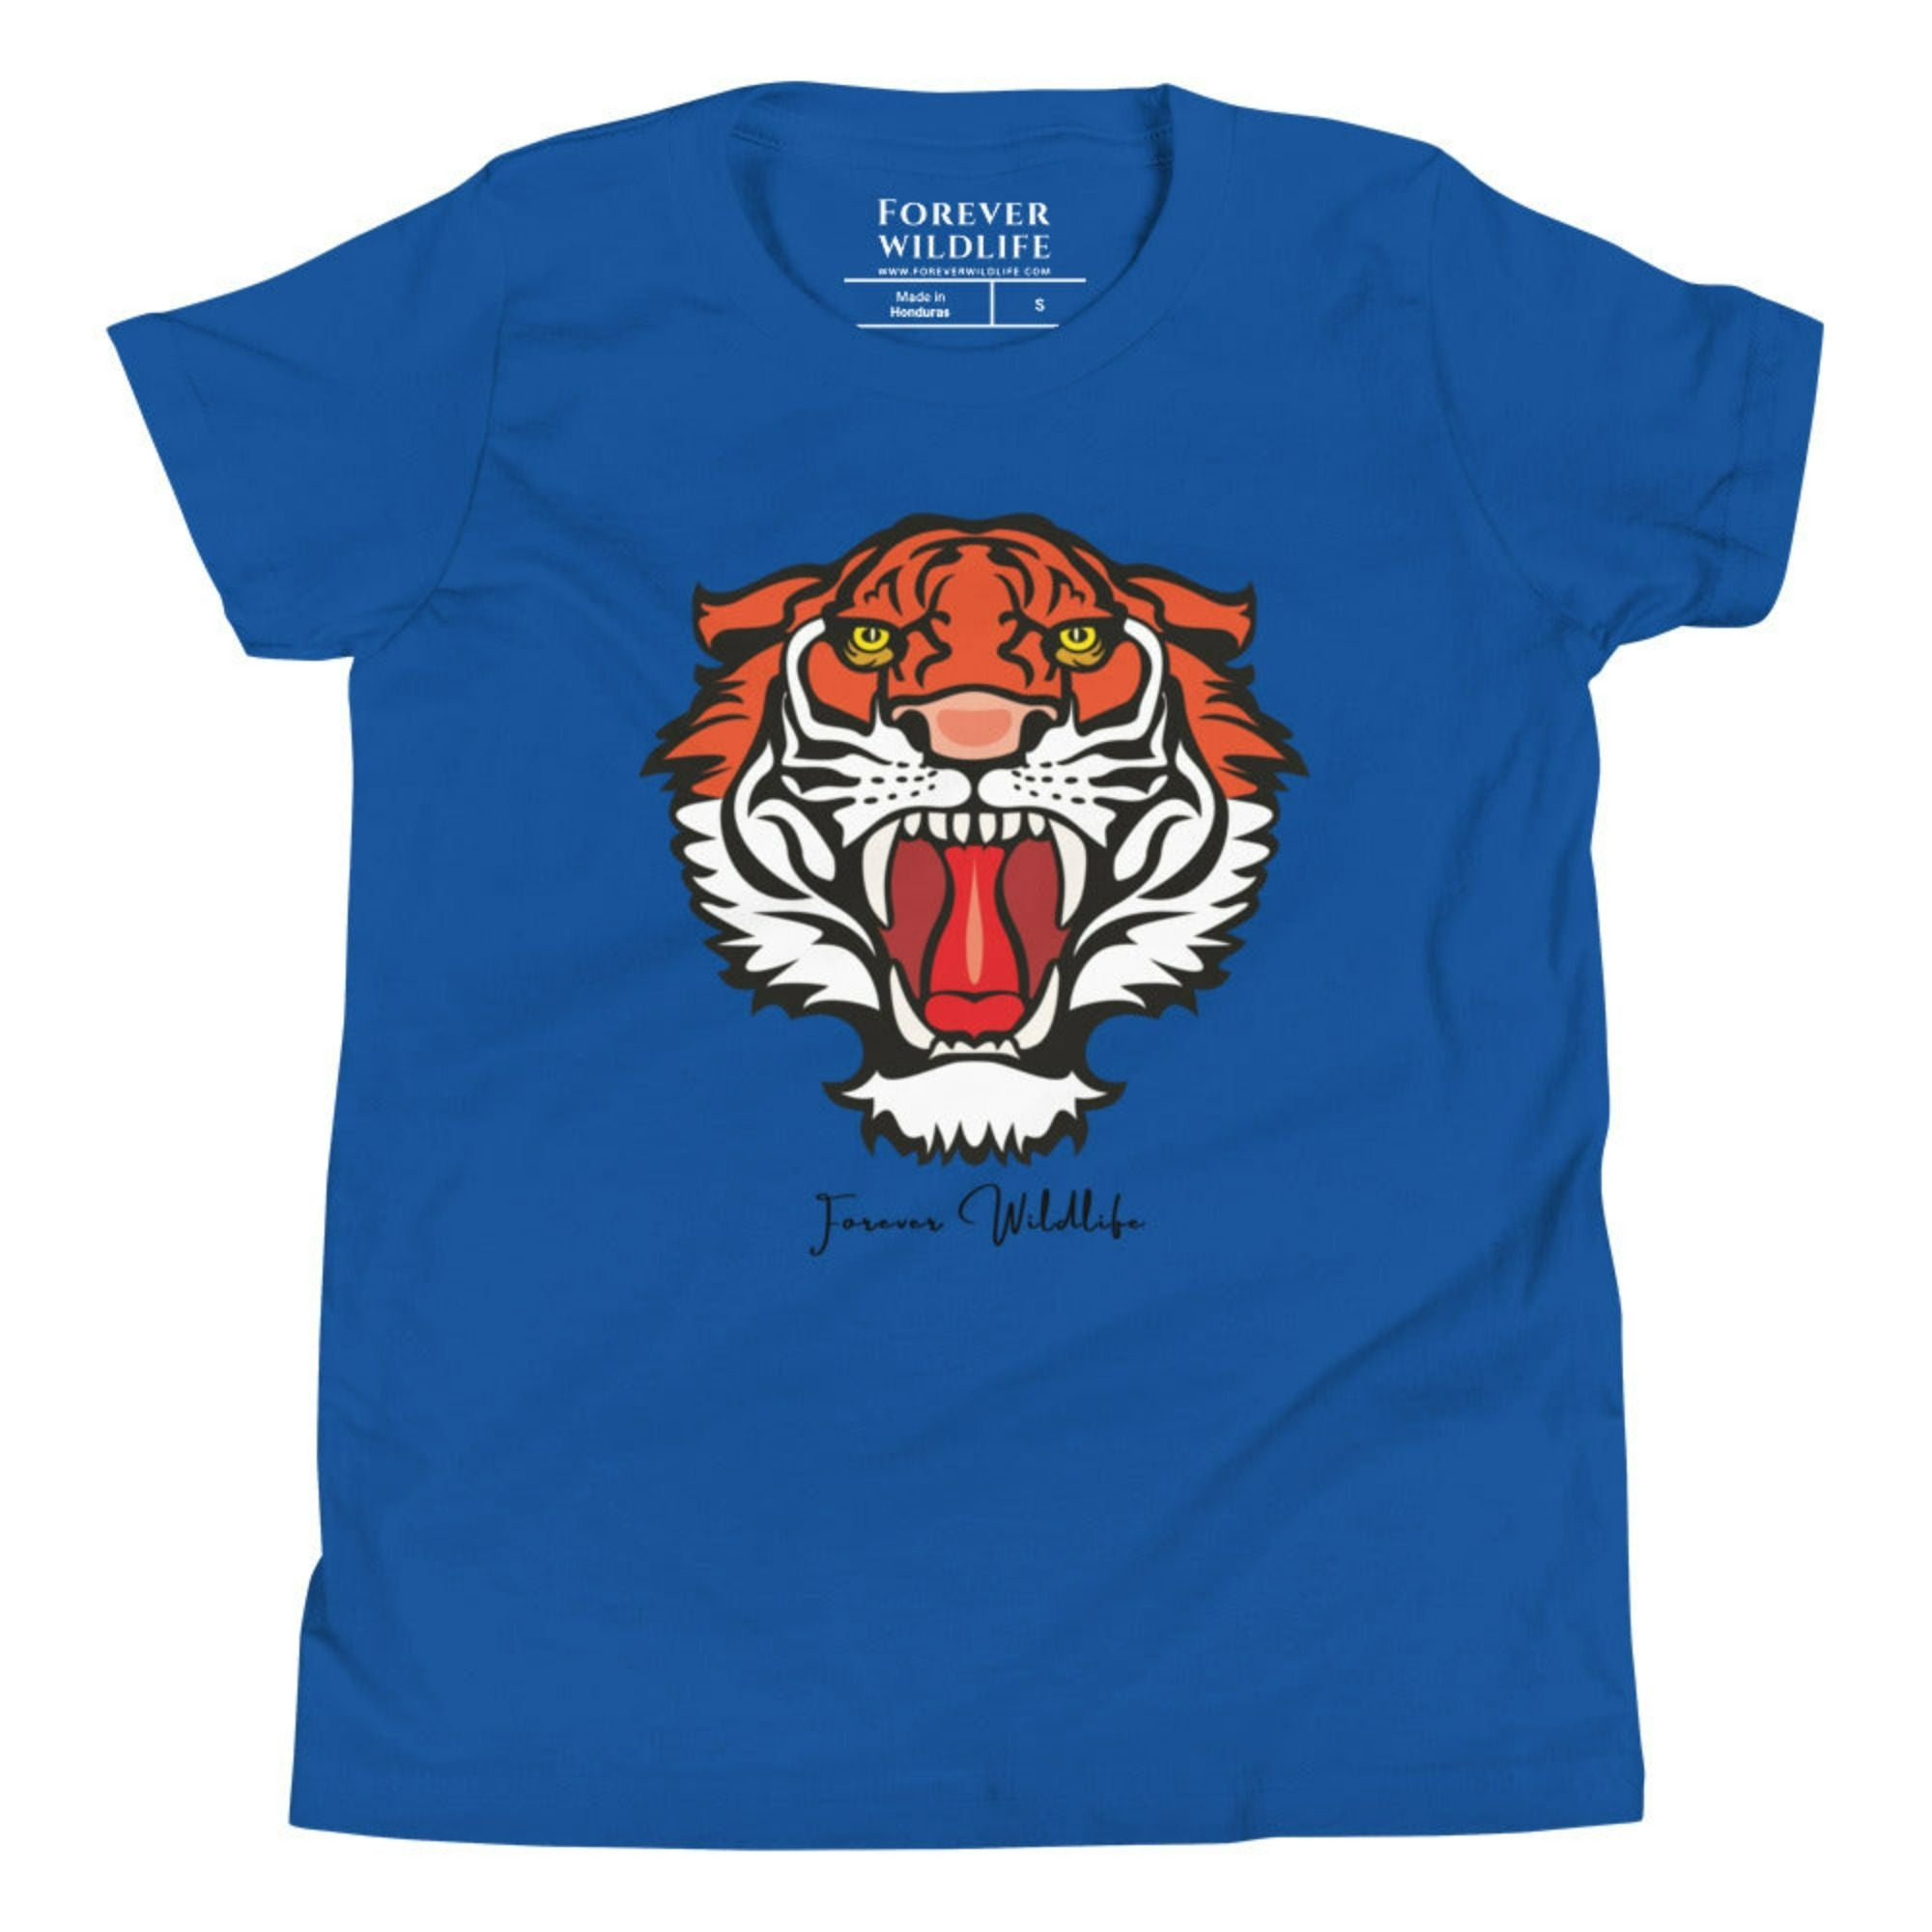 Royal Blue Youth T-Shirt with Tiger graphic as part of Wildlife T Shirts, Wildlife Clothing & Apparel by Forever Wildlife